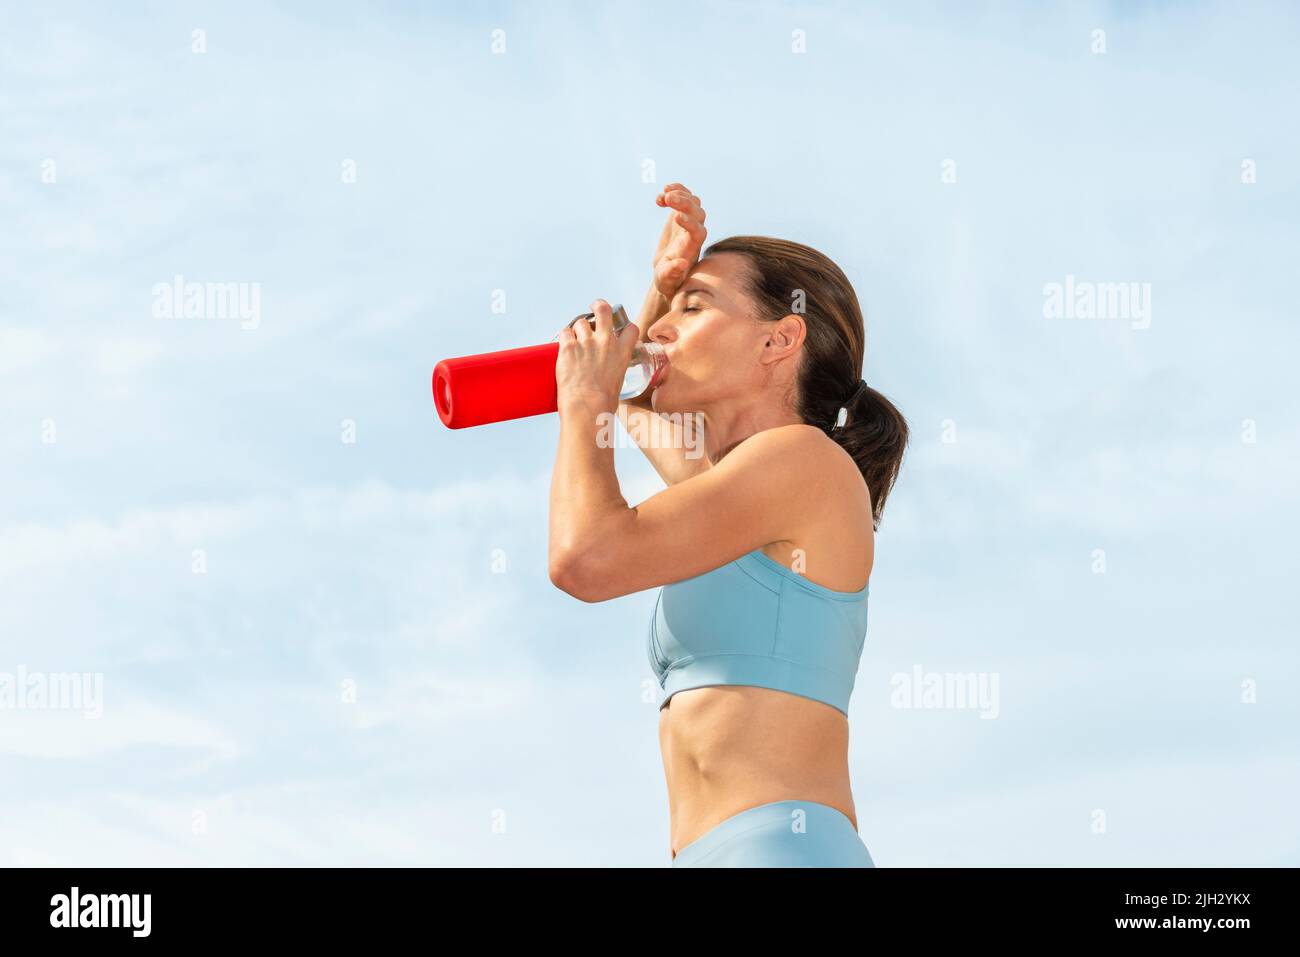 Sporty woman feeling the effects of the sun and taking a drink of water. Stock Photo